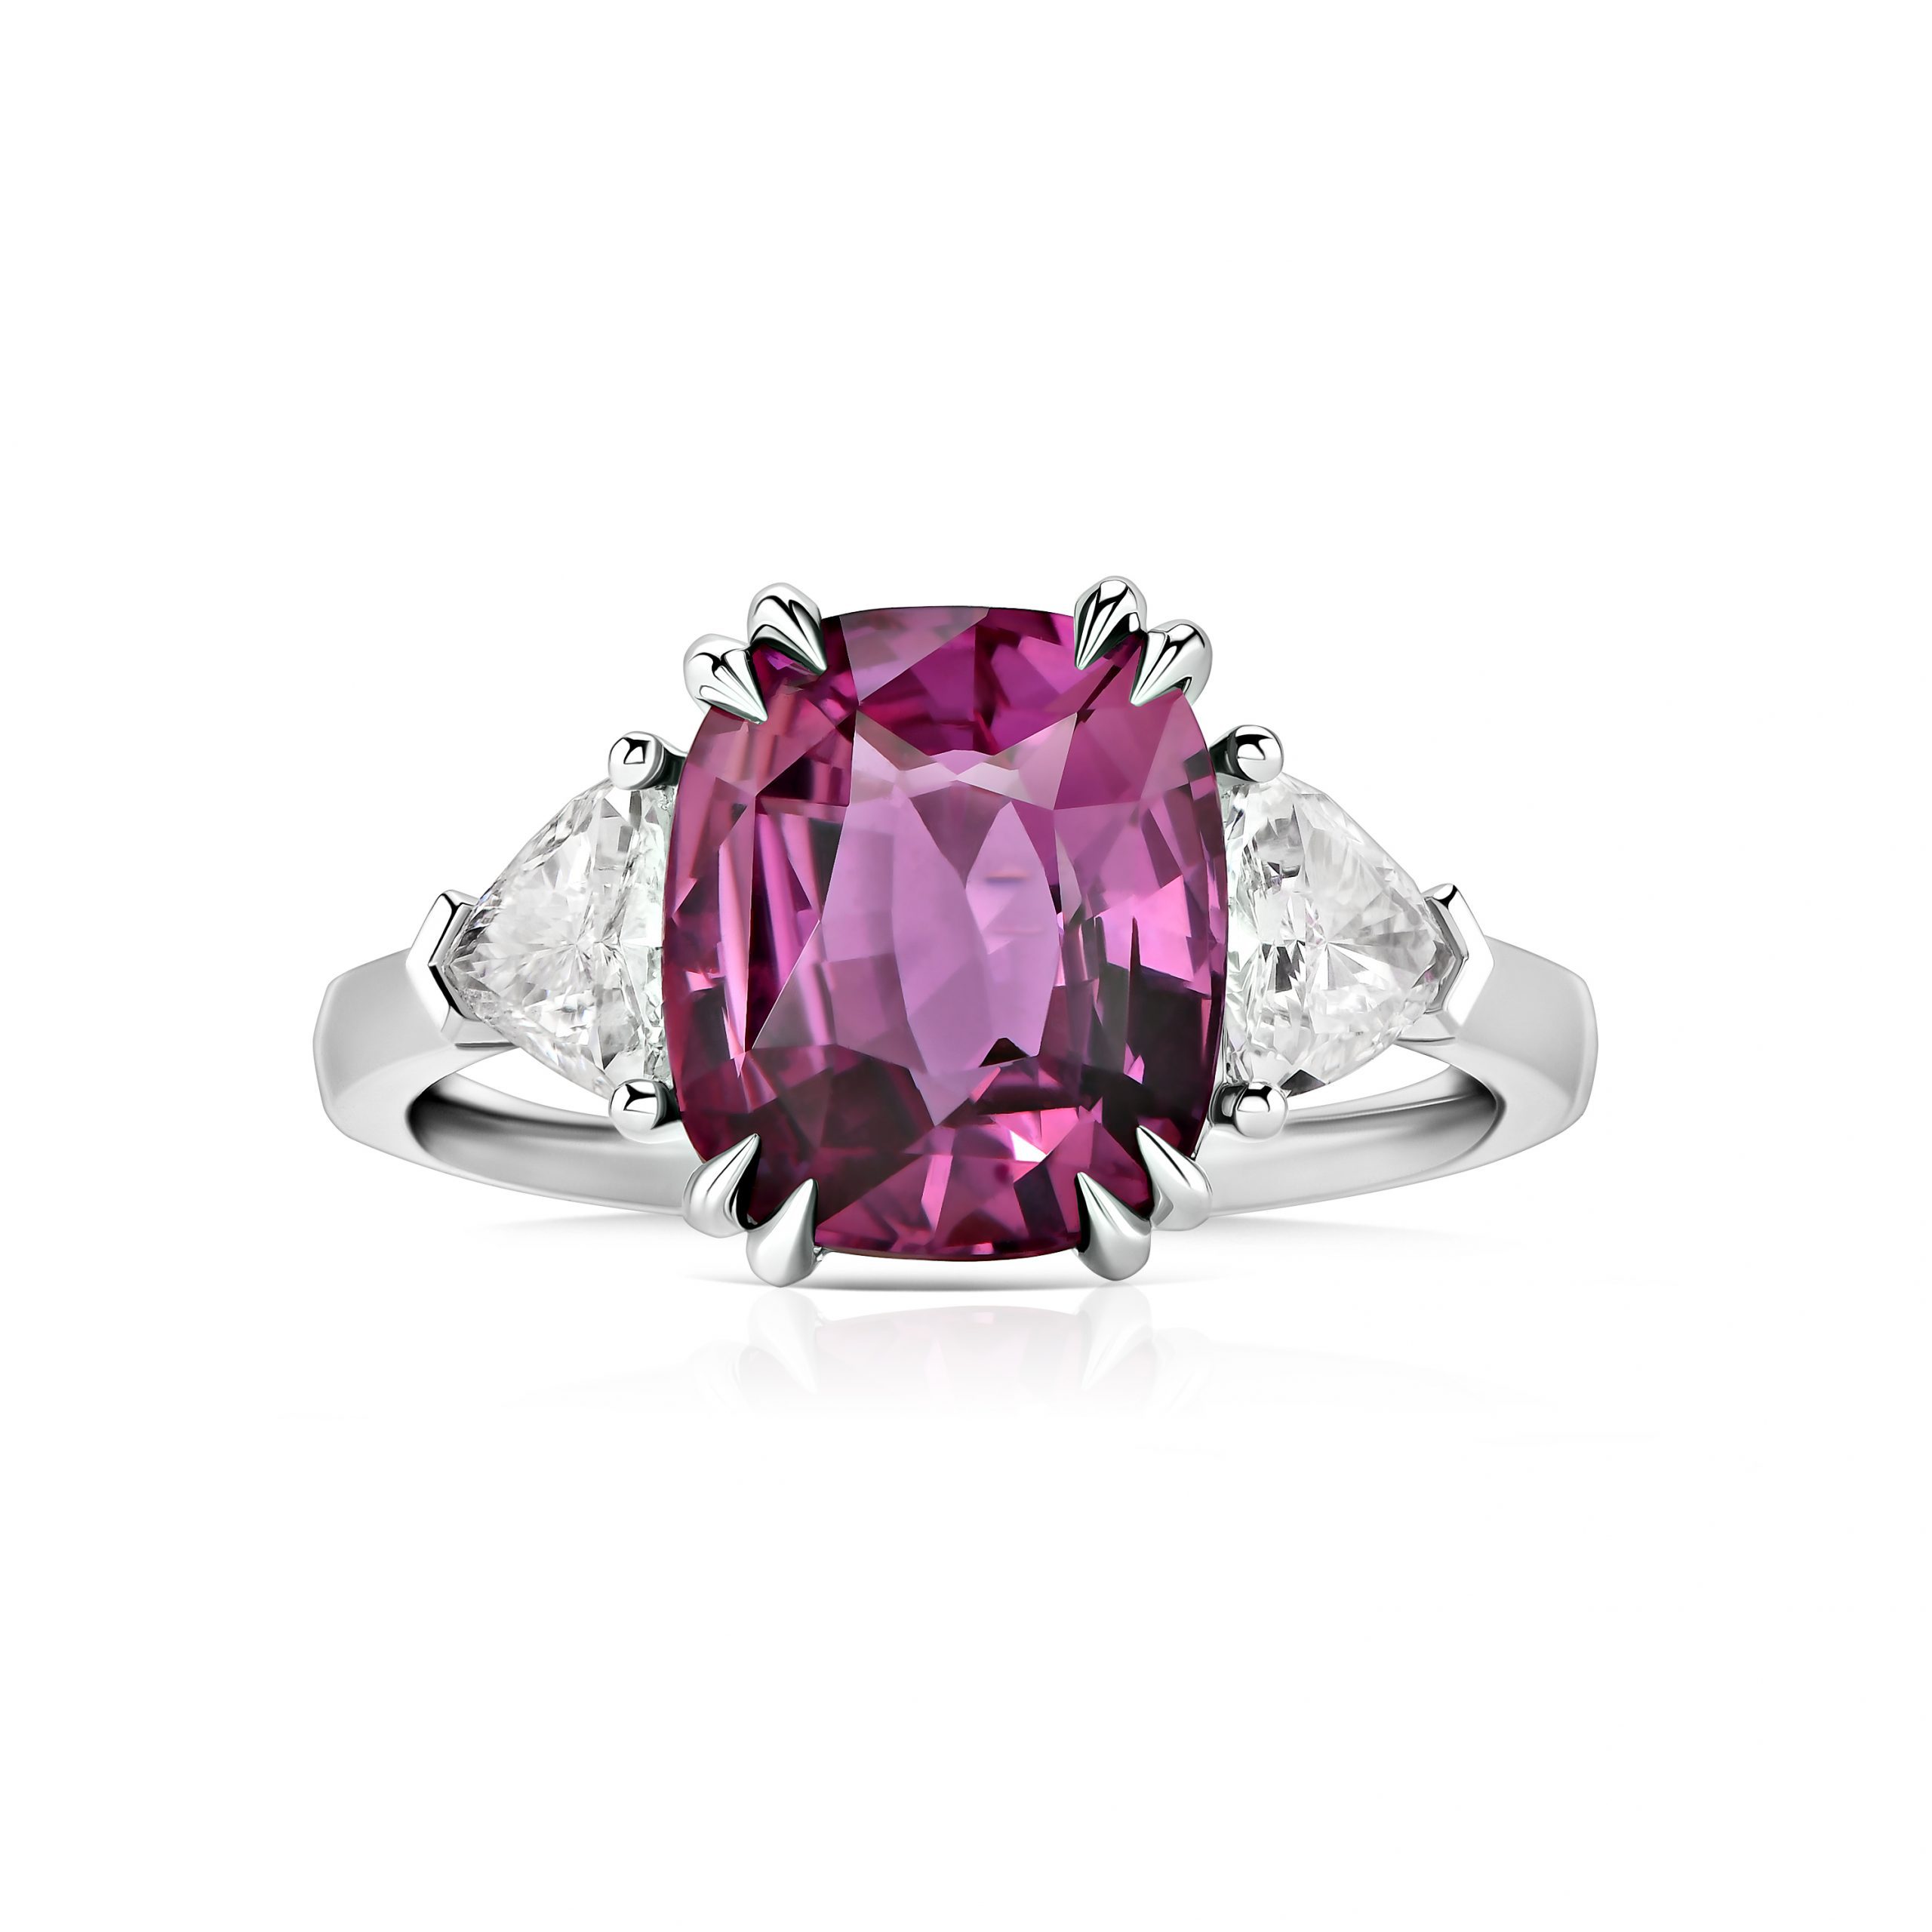 Spinel ring 4.52 ct #1